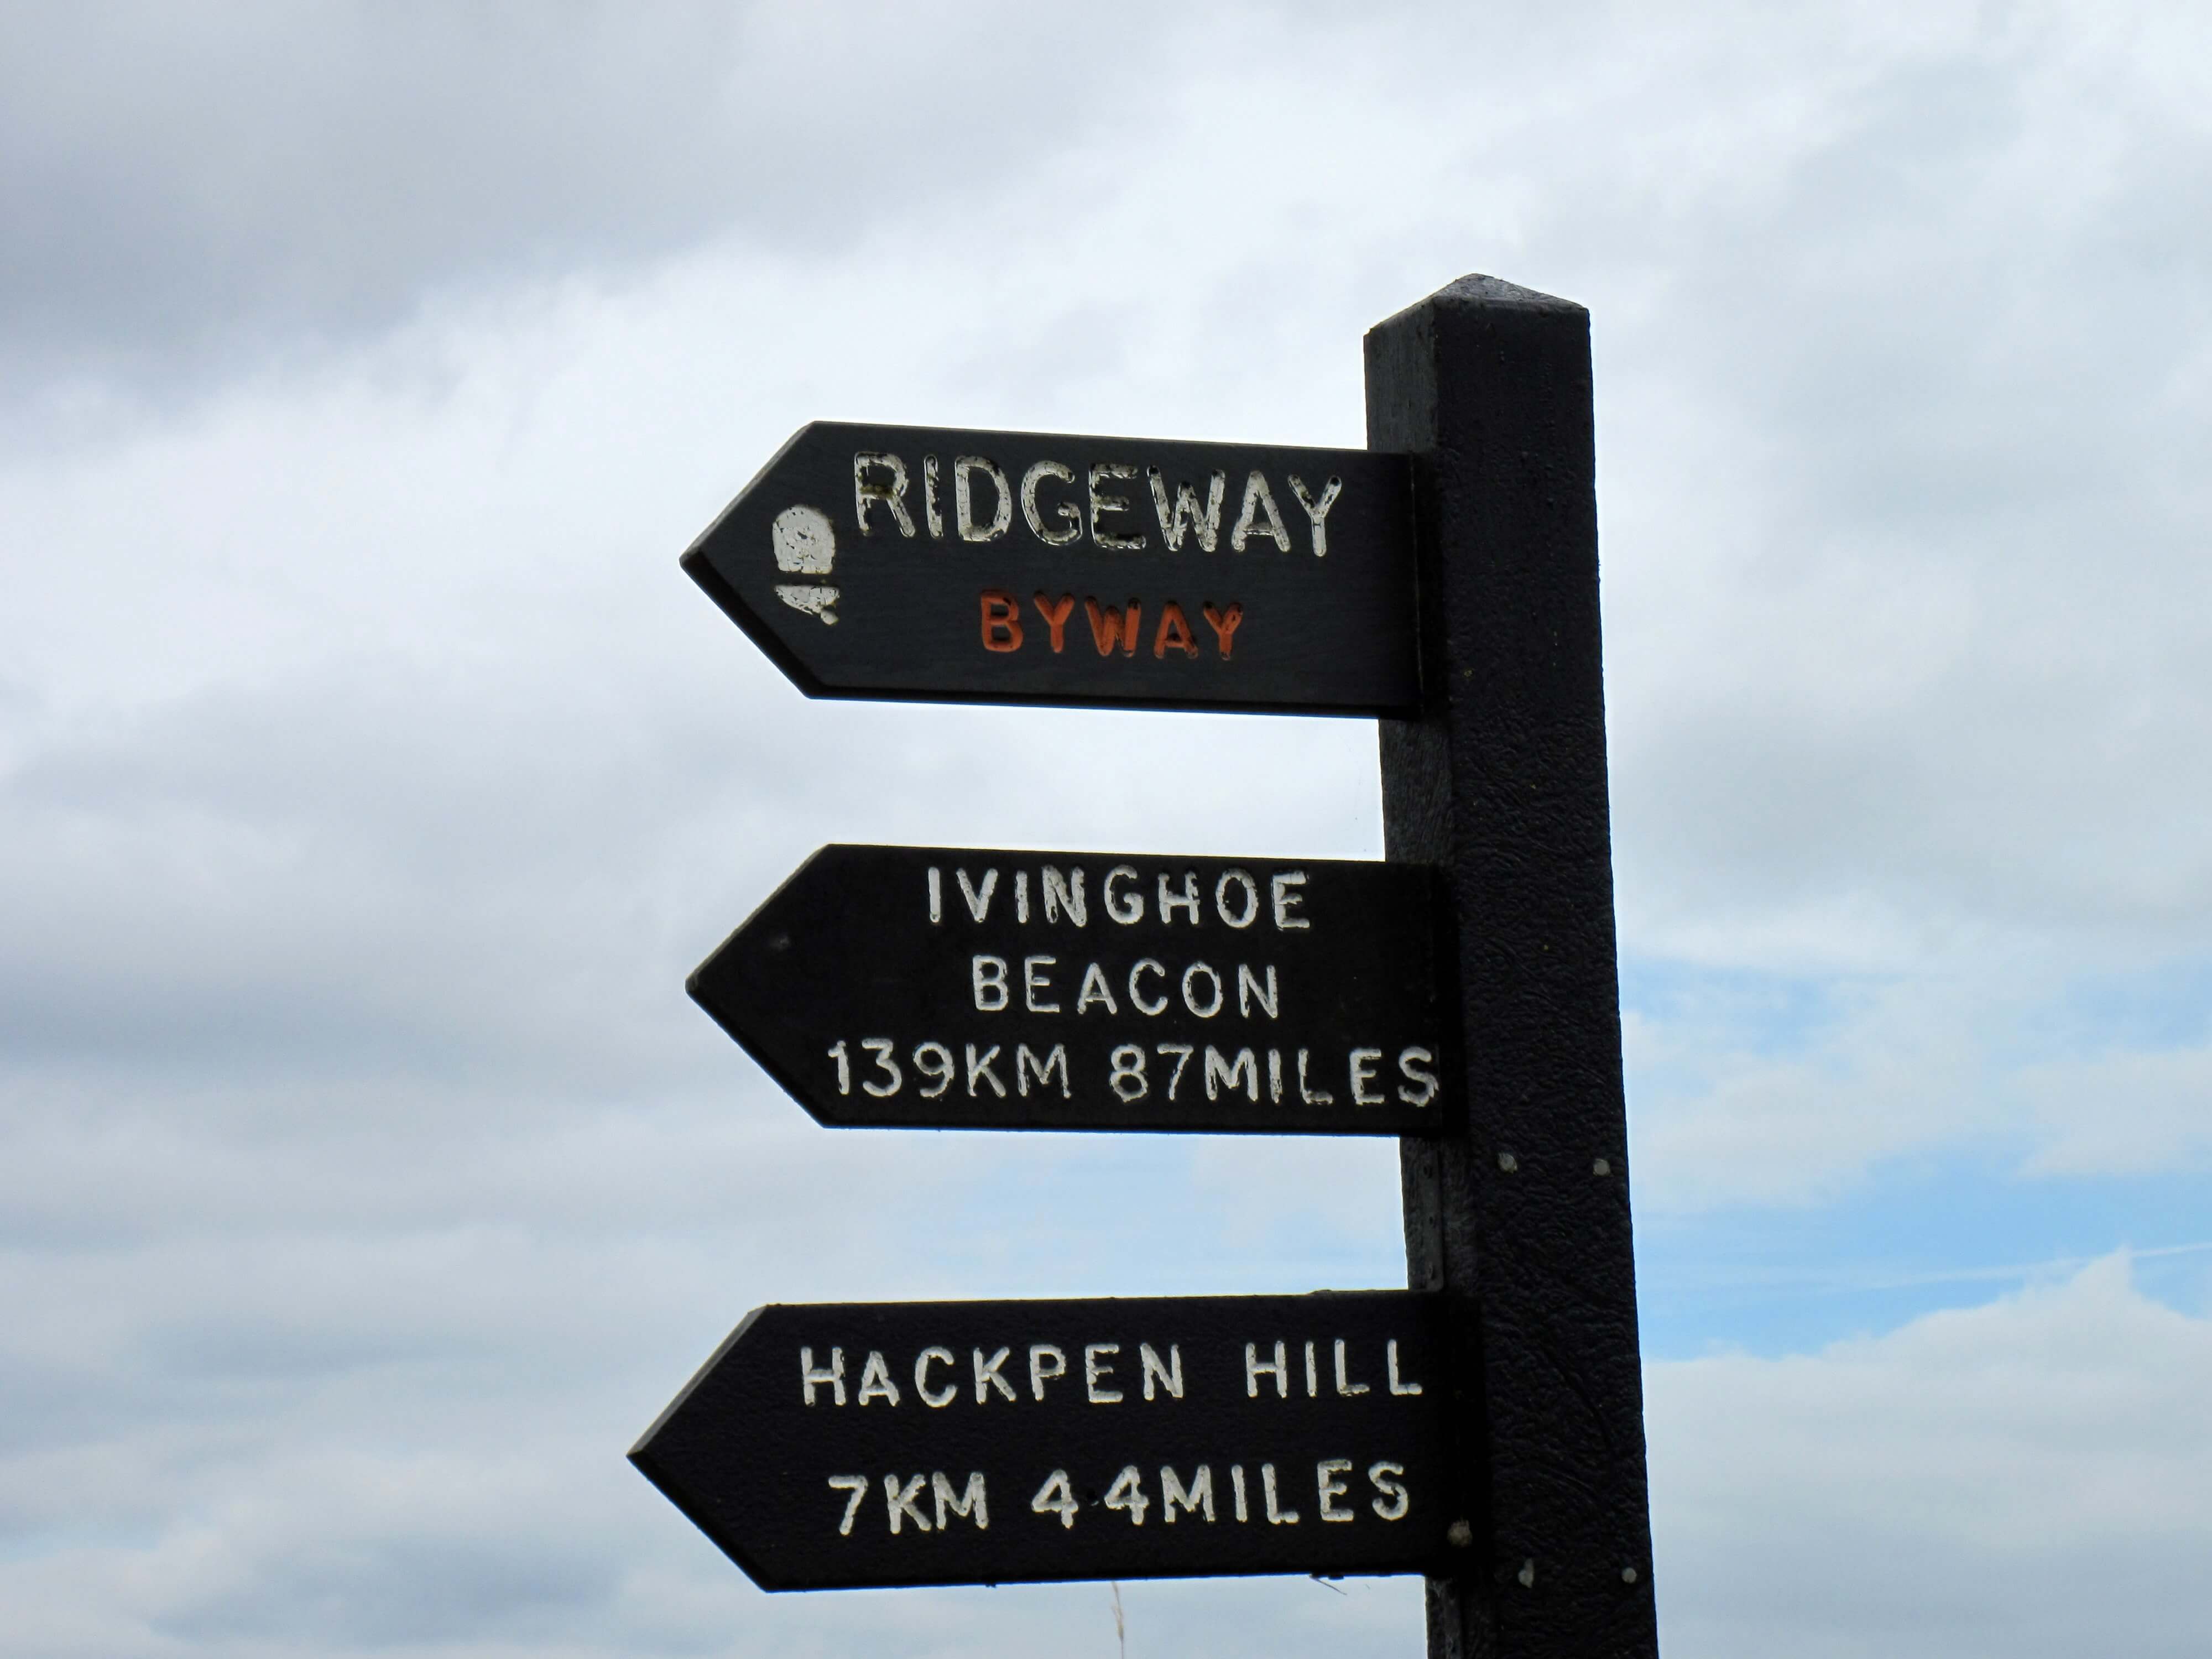 A signpost showing the stops along the Ridgeway National Trail in England